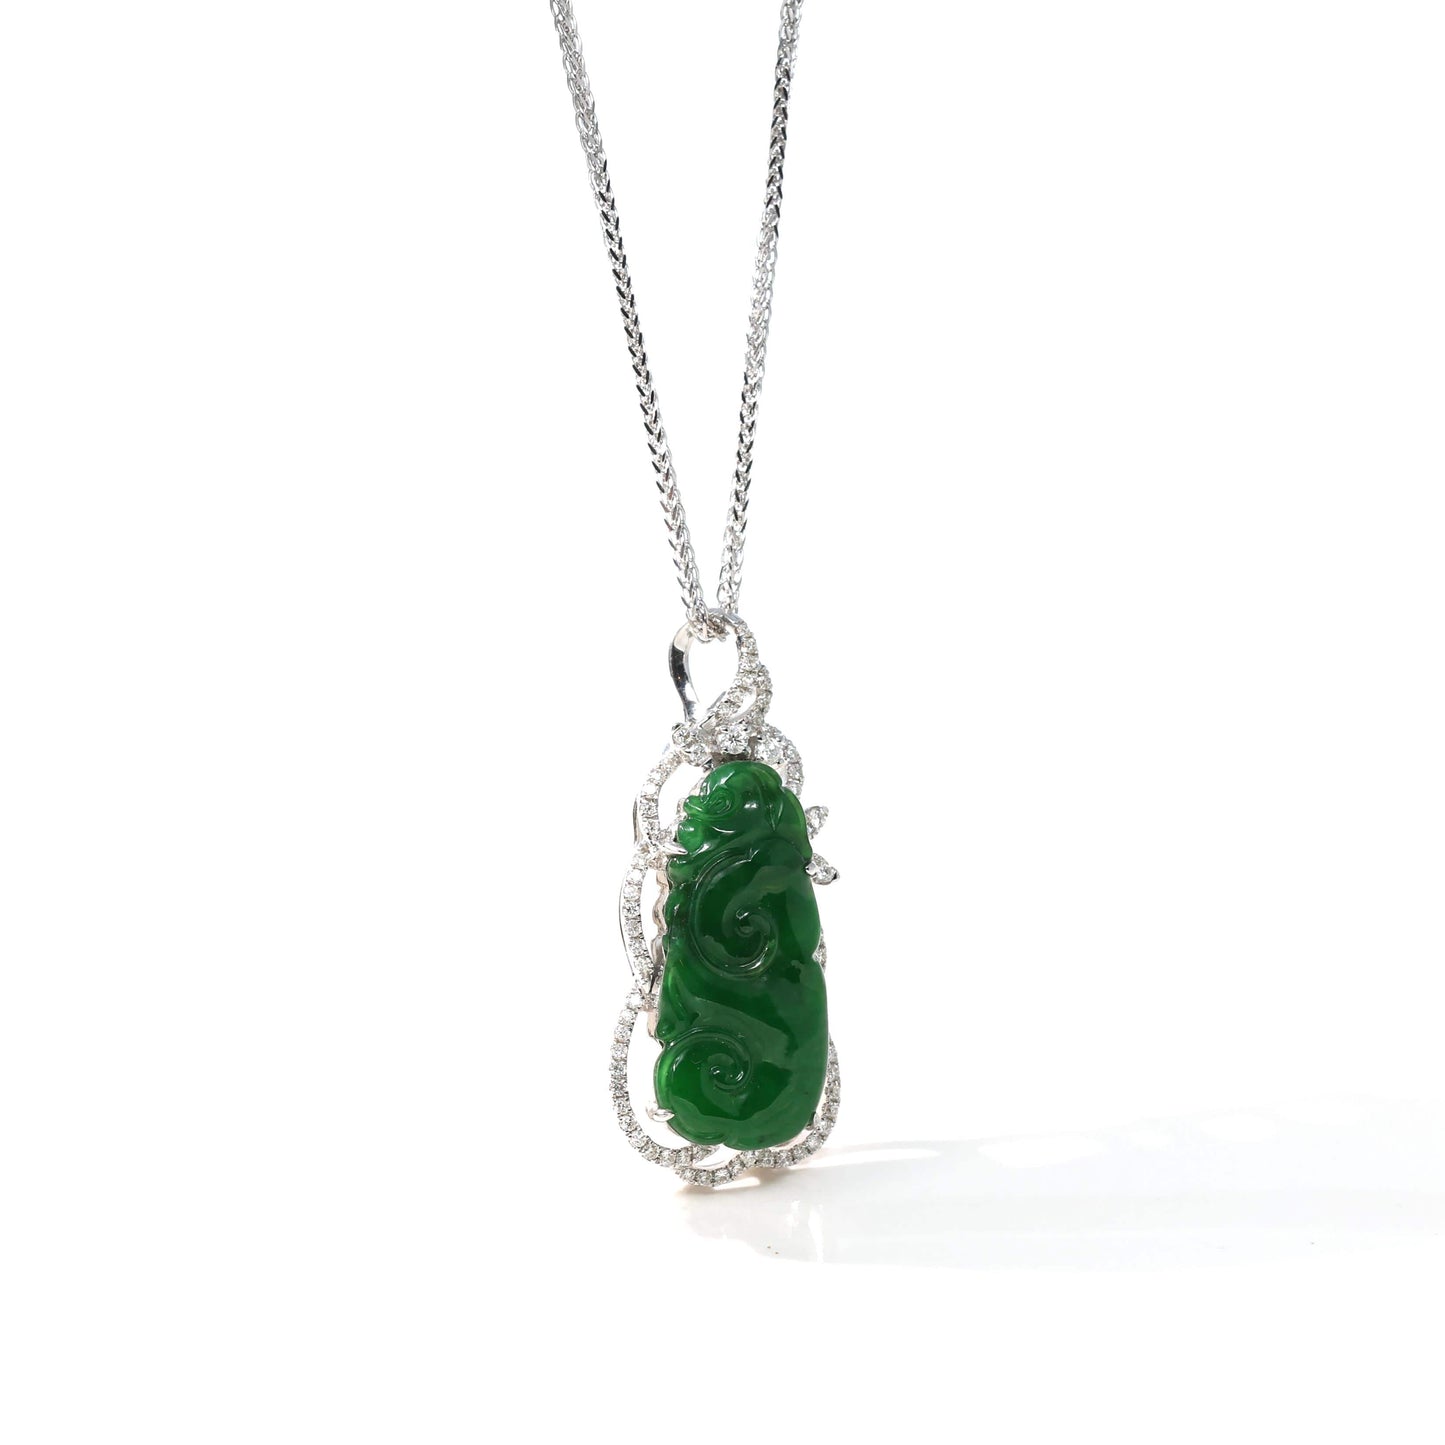 RealJade¨ Co. 18k Gold Jadeite Necklace 18K White Gold High-End Imperial Jadeite Jade"As you wish: RuYi" Necklace with Diamonds